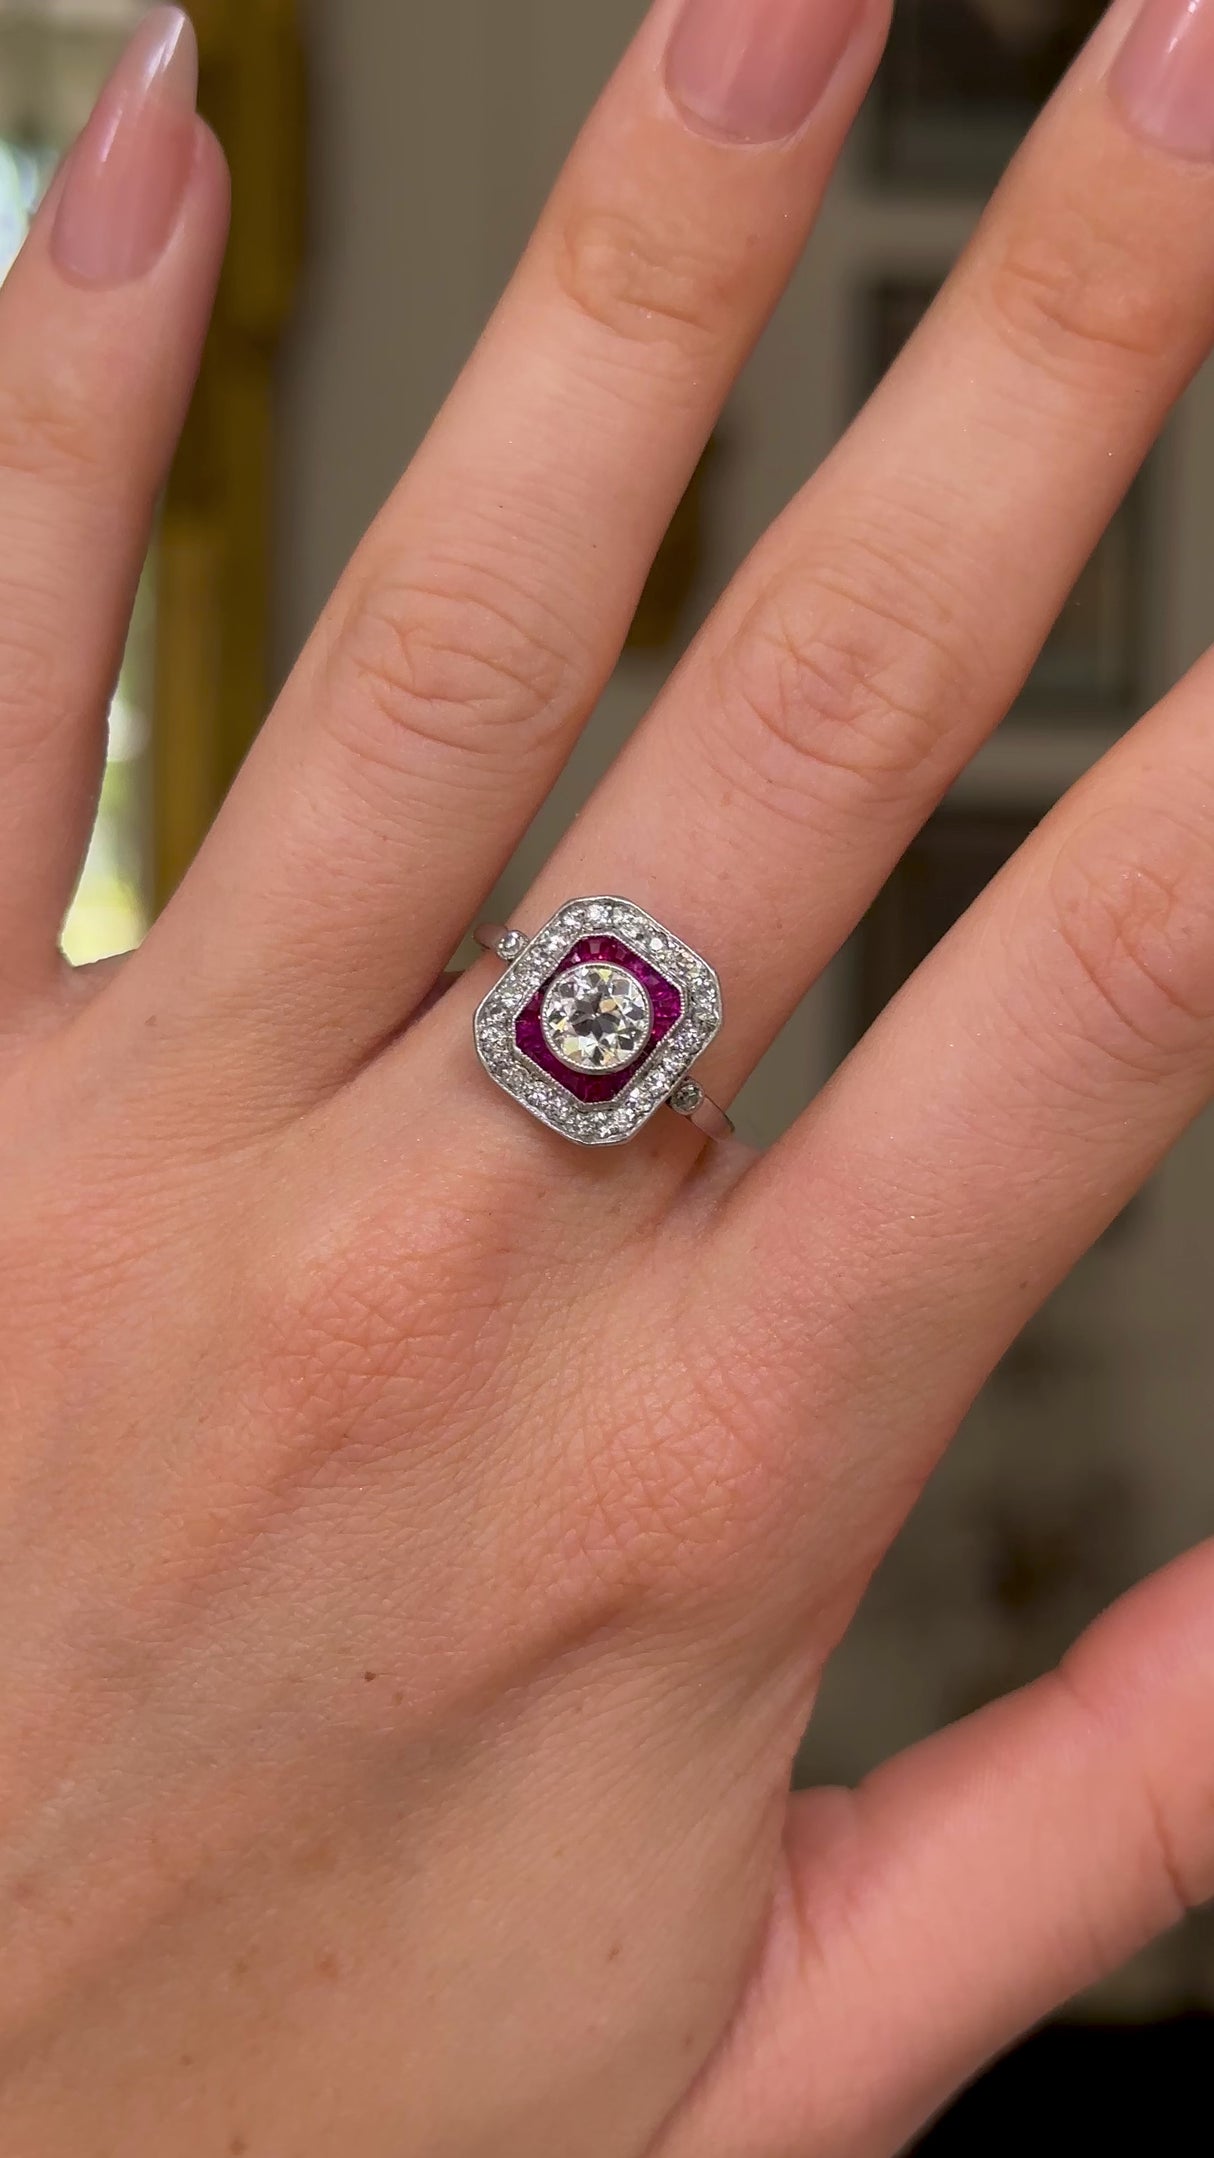 Russian, early 20th century, ruby & diamond target ring